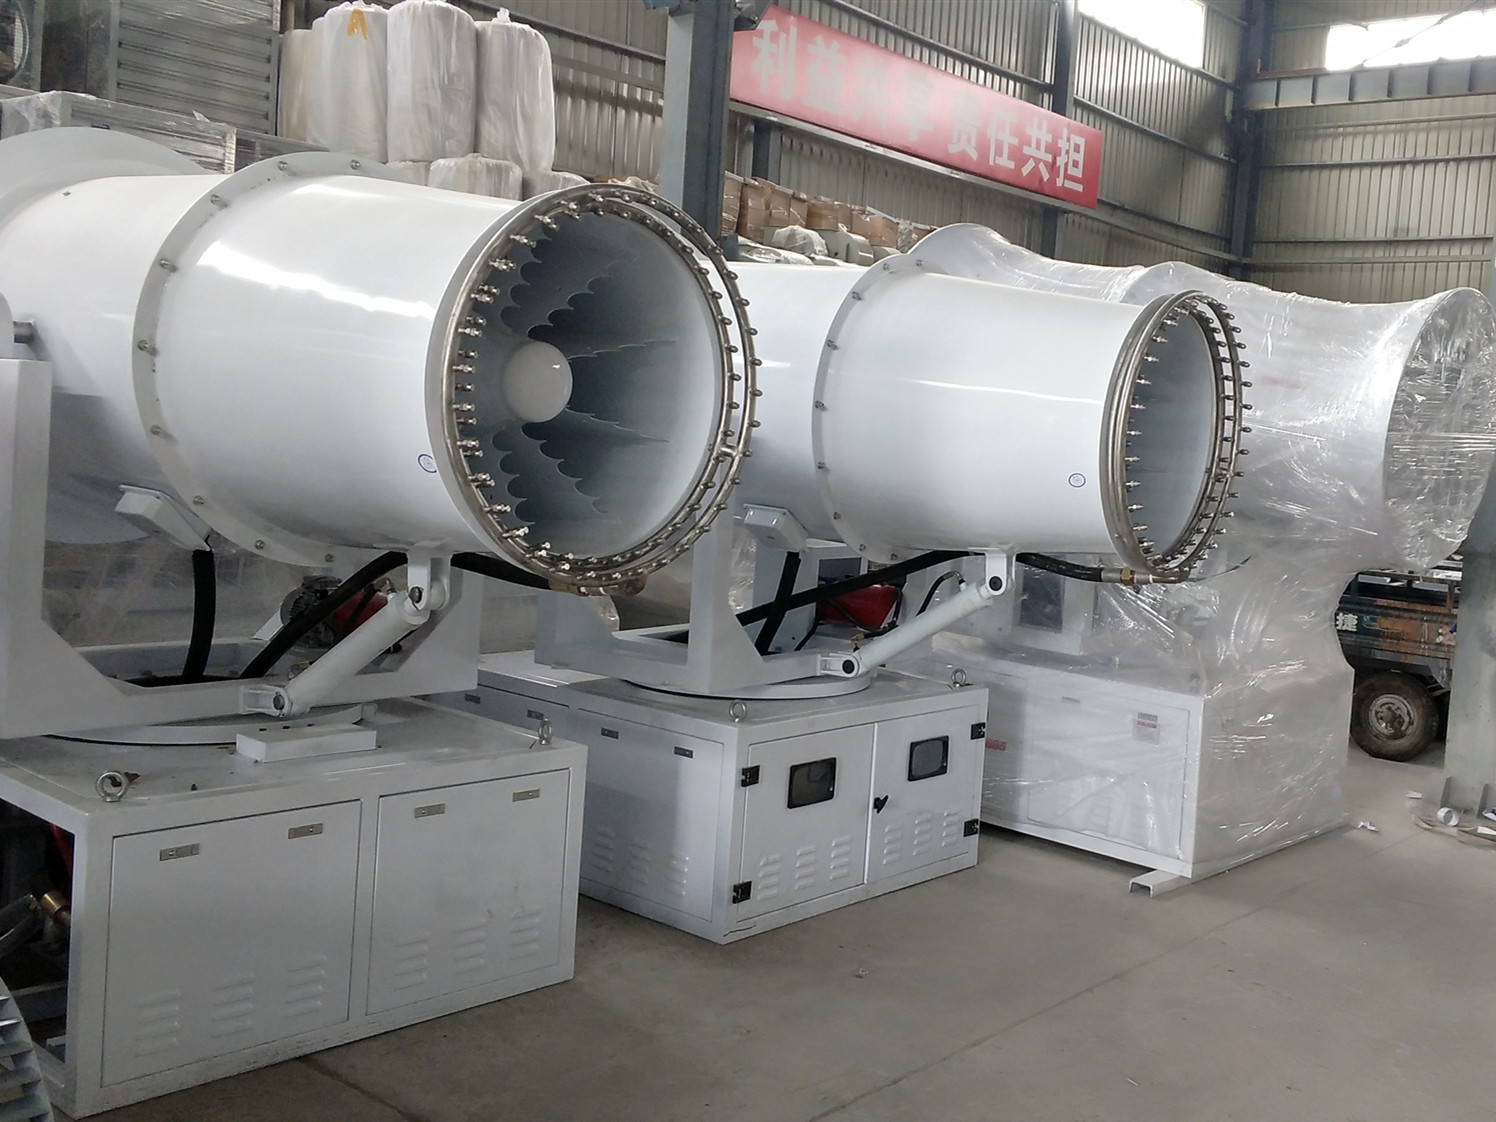  Automatic Agricultural BS-80 Fog Cannon Dust Suppression System For Coal Mines Manufactures